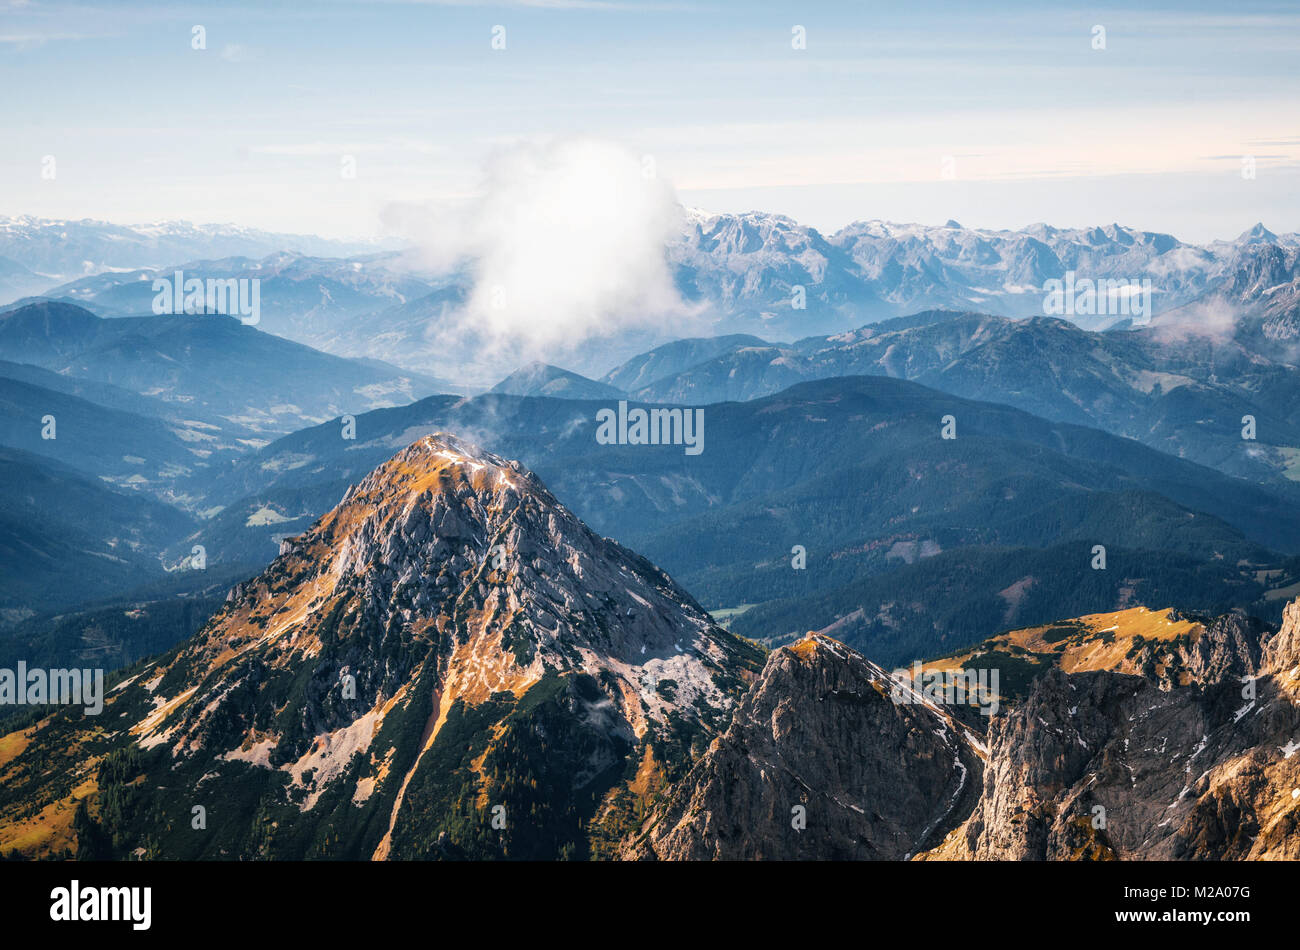 Aerial view of mountain of Dachstein plateau ski resort with cloud on top looking like volcano. Austria Stock Photo